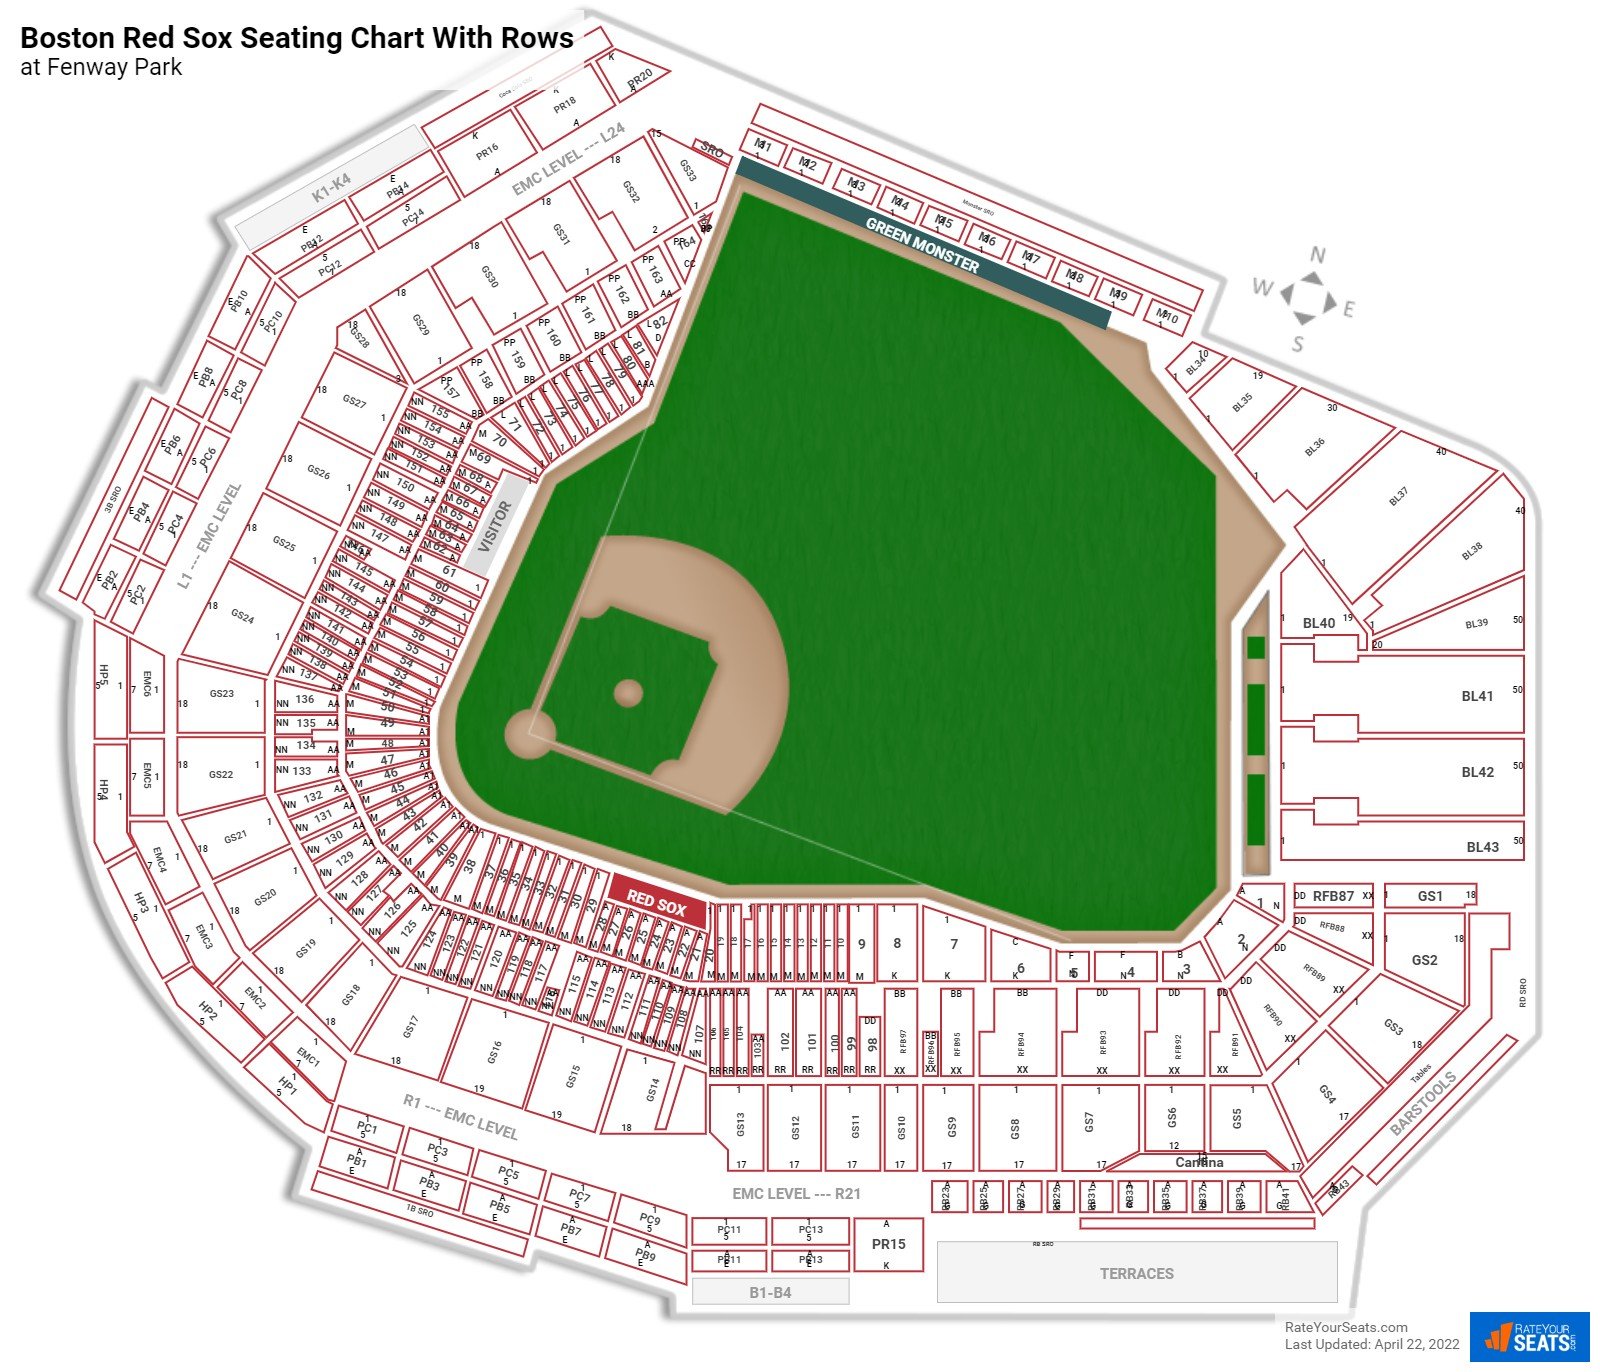 Fenway Park seating chart with row numbers